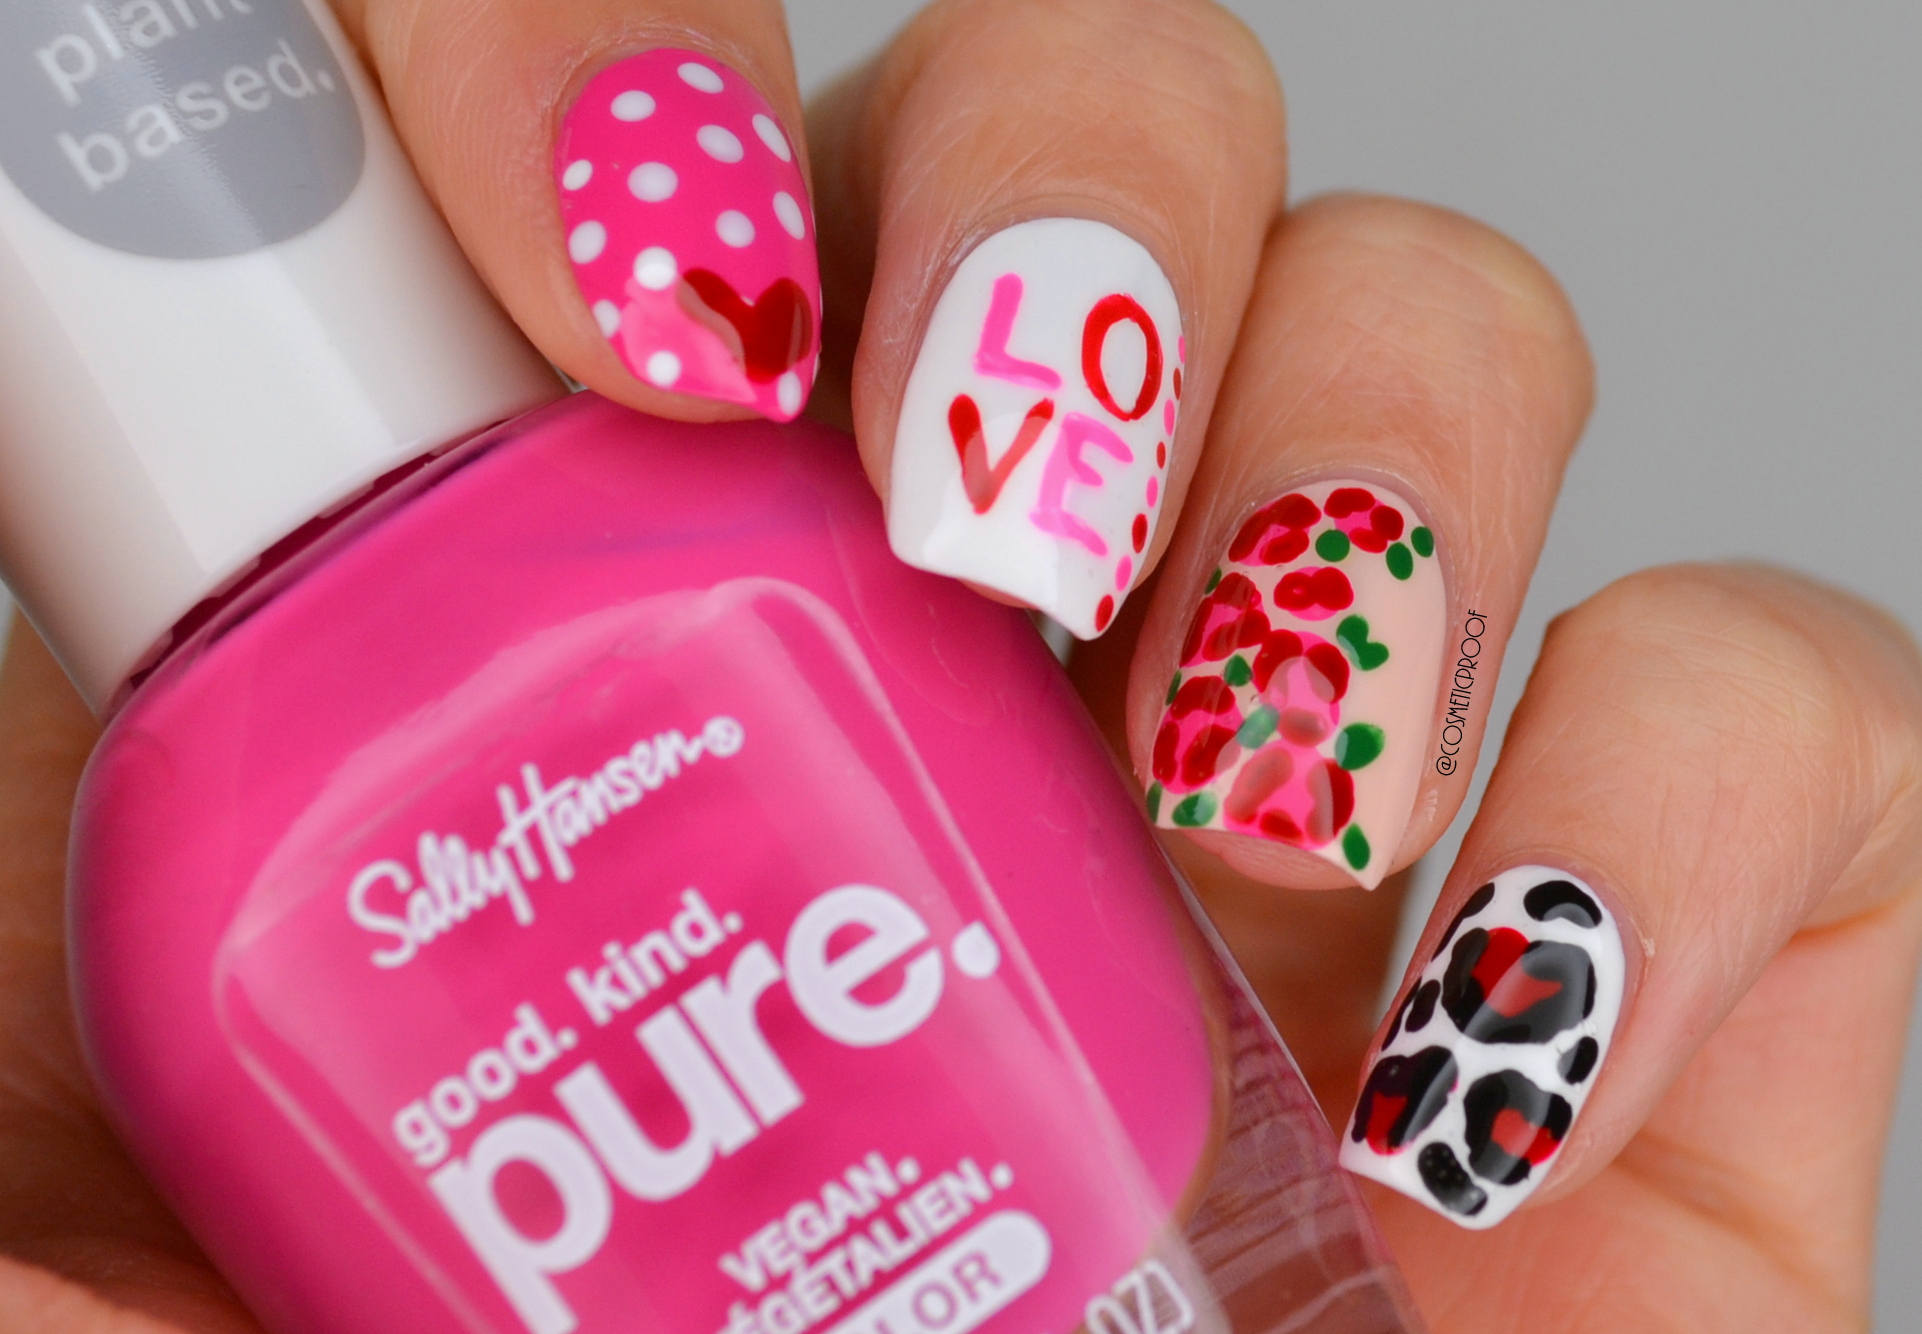 2. "25 Valentine's Day Nail Art Ideas Working as a Wonderful Reminder of ... - wide 1